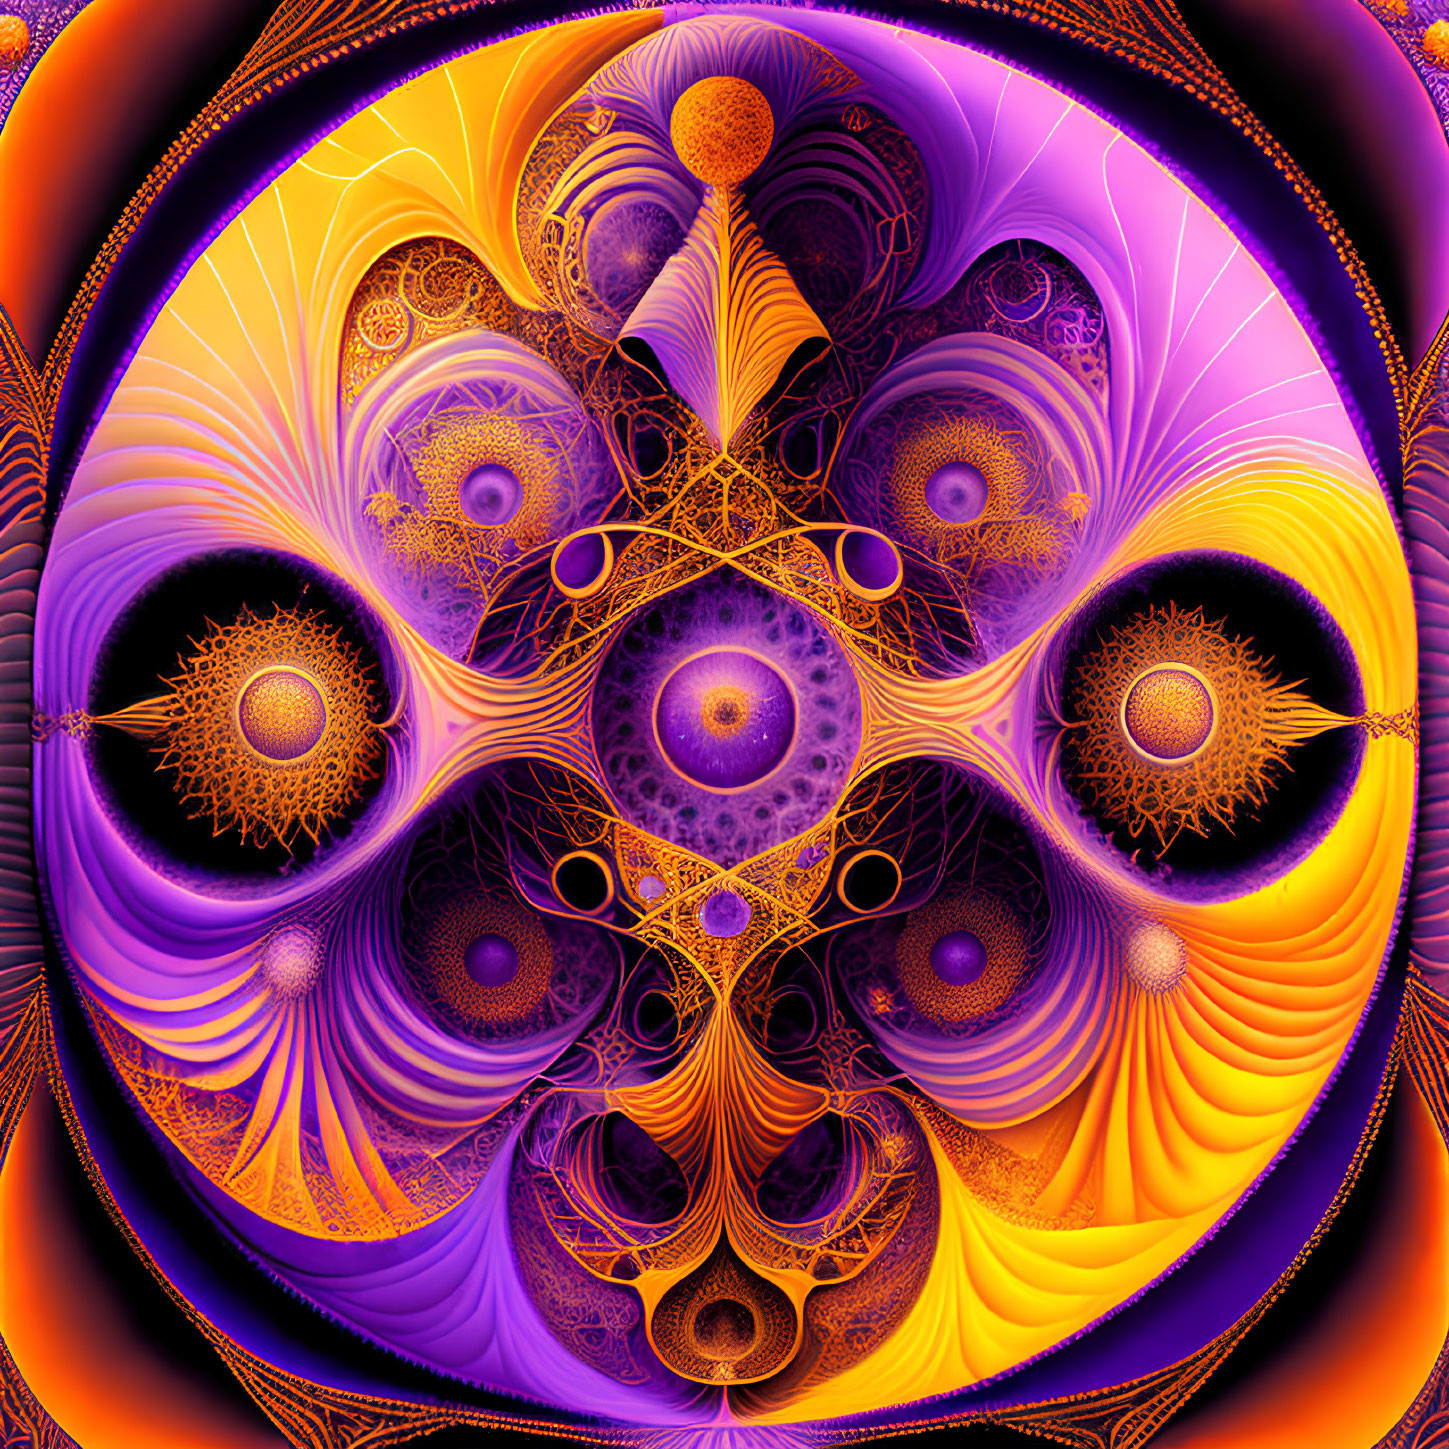 Colorful Fractal Image with Orange, Purple, and Yellow Patterns